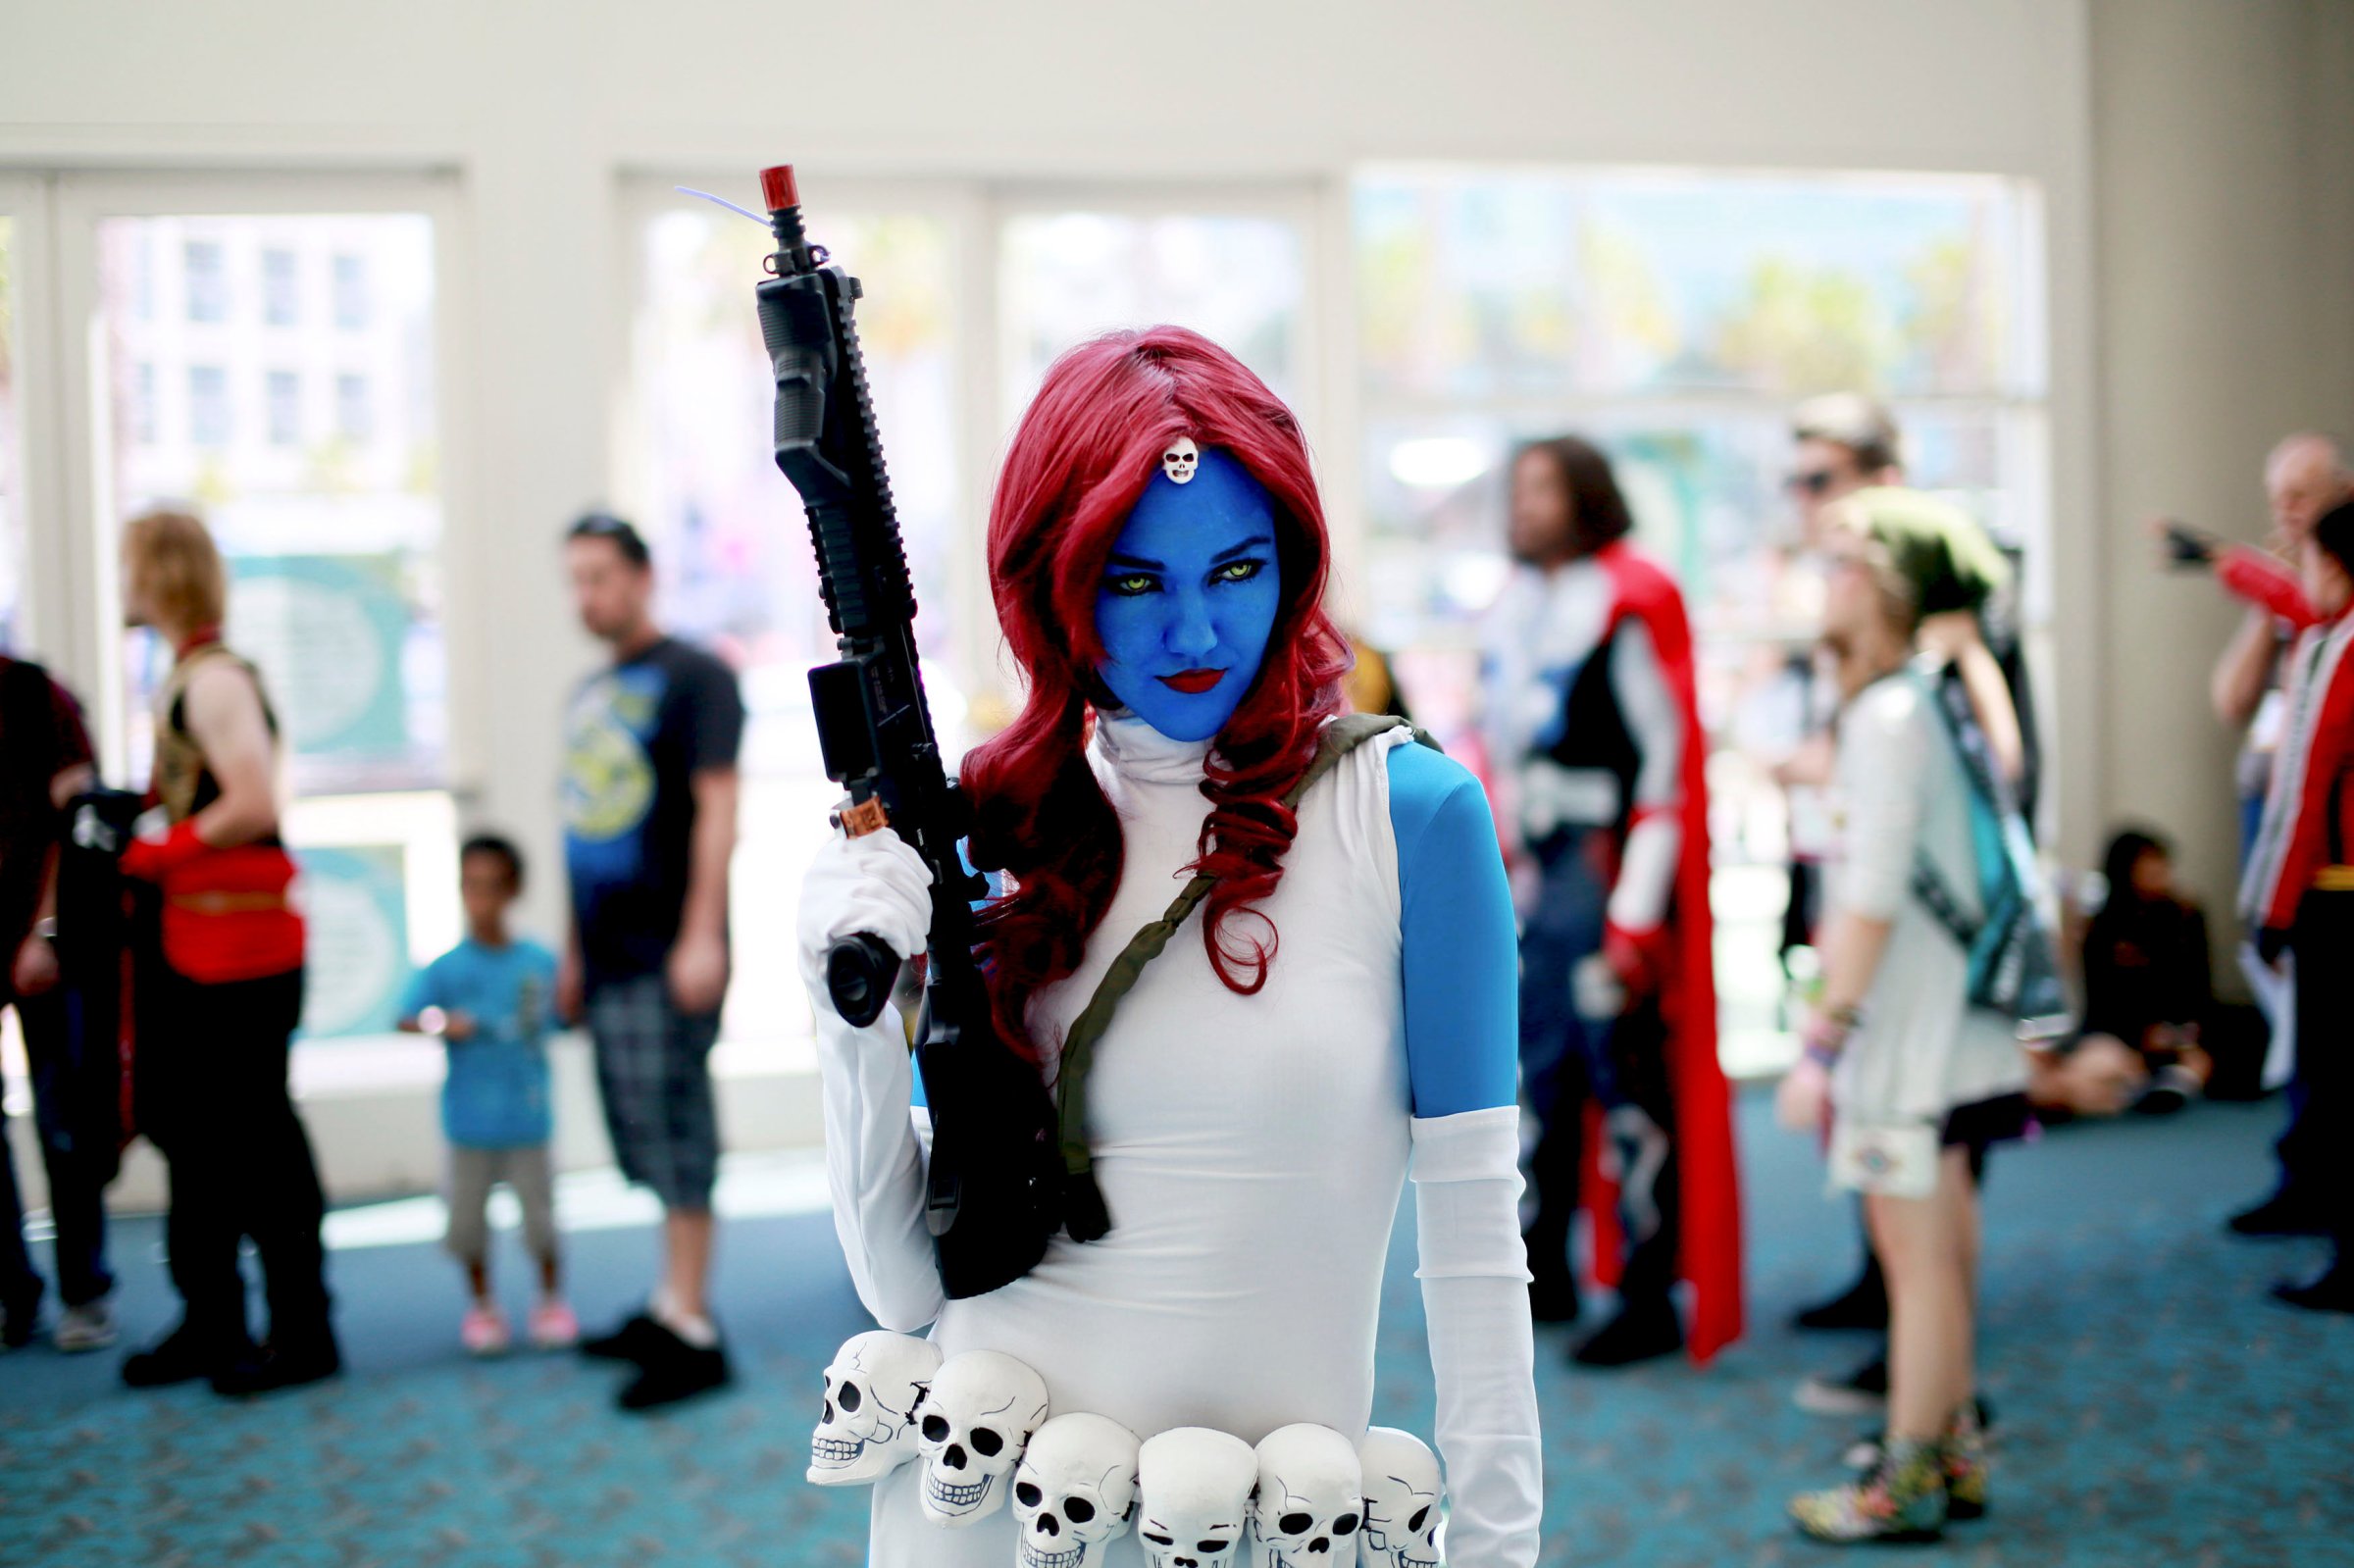 Allie Shaughnessy, who is dressed as Mystique, poses during the 2014 Comic-Con International Convention in San Diego, California